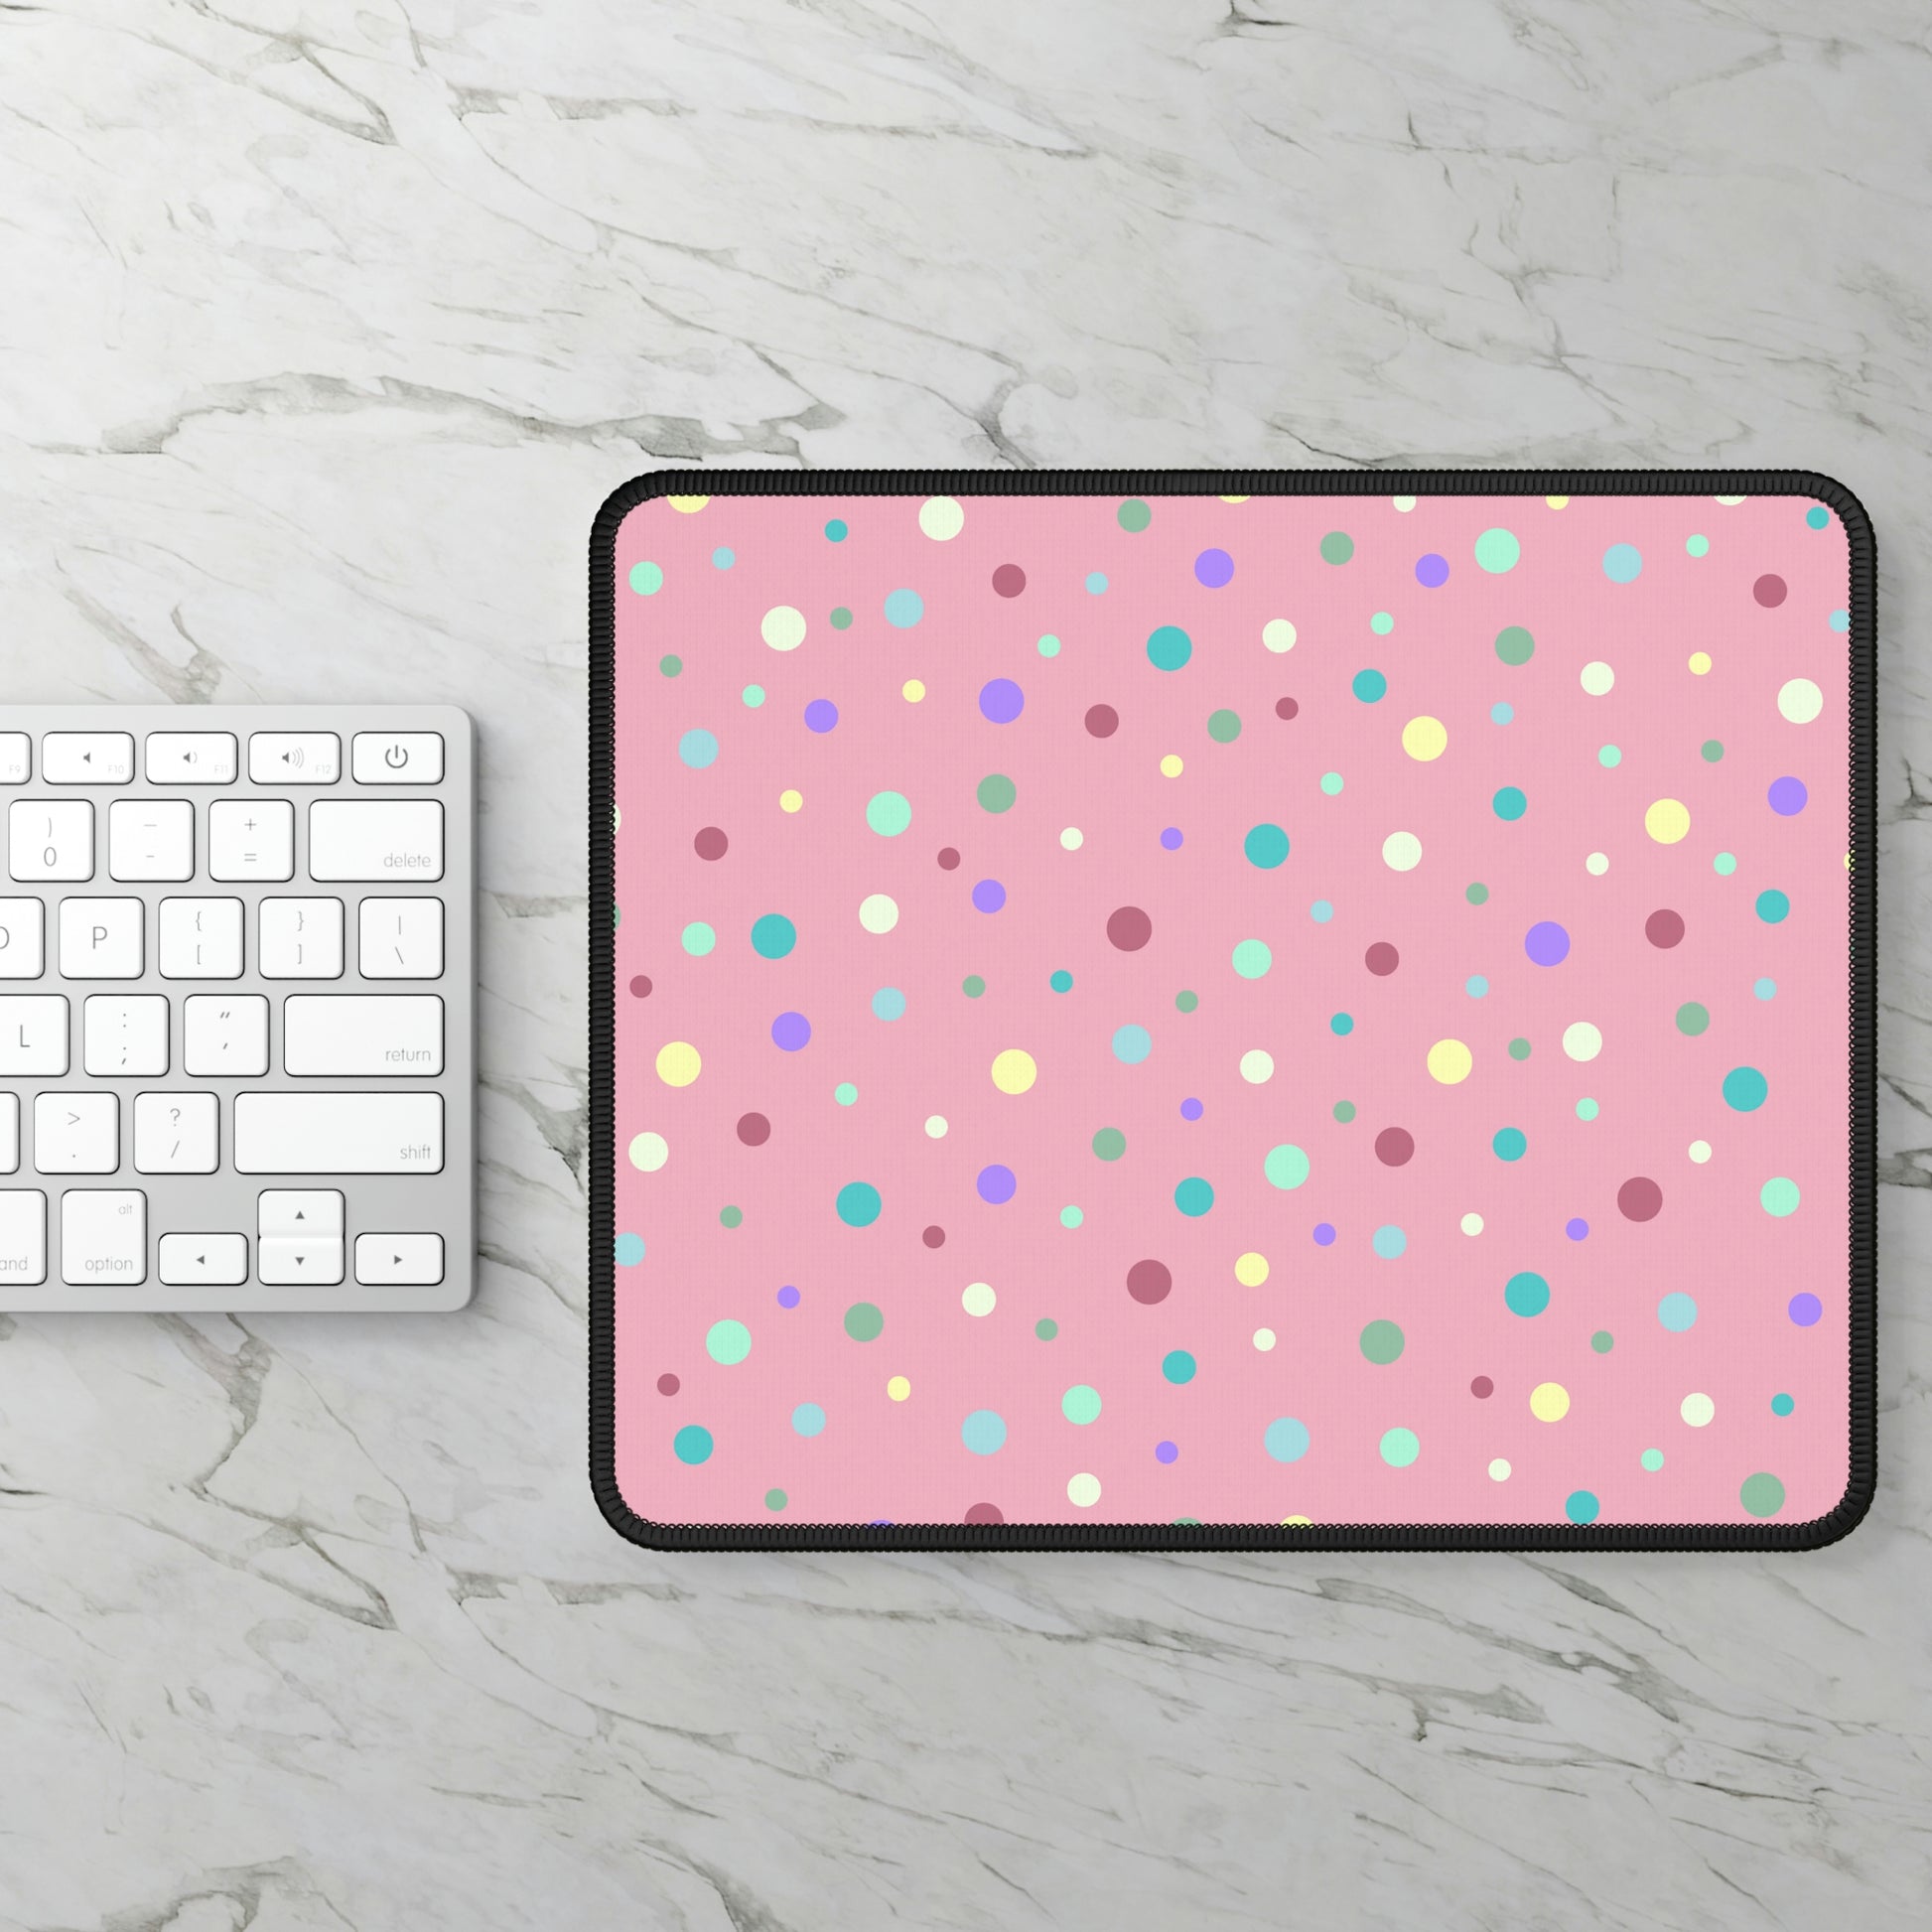 Colorful Dots Gaming Mouse Pad - Desk Cookies